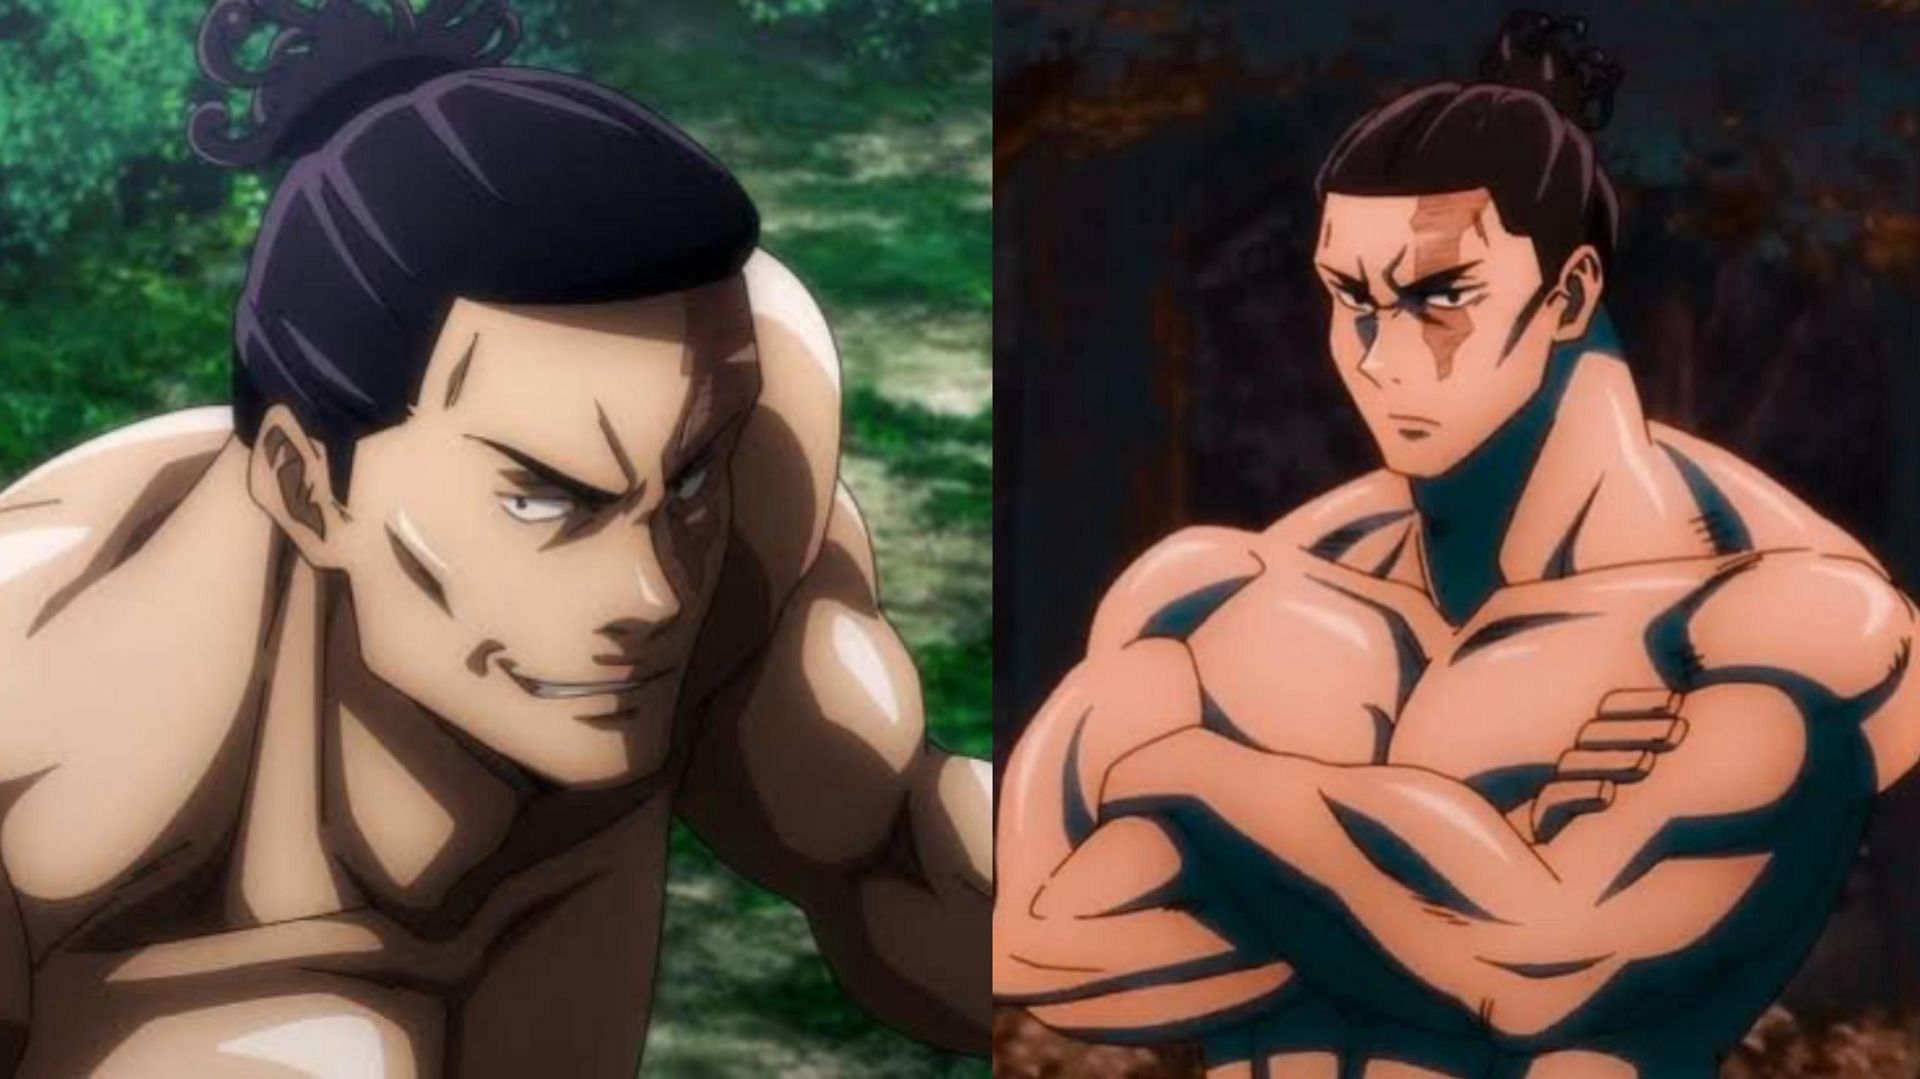 Muscular Anime Characters (Image via Pinterest)